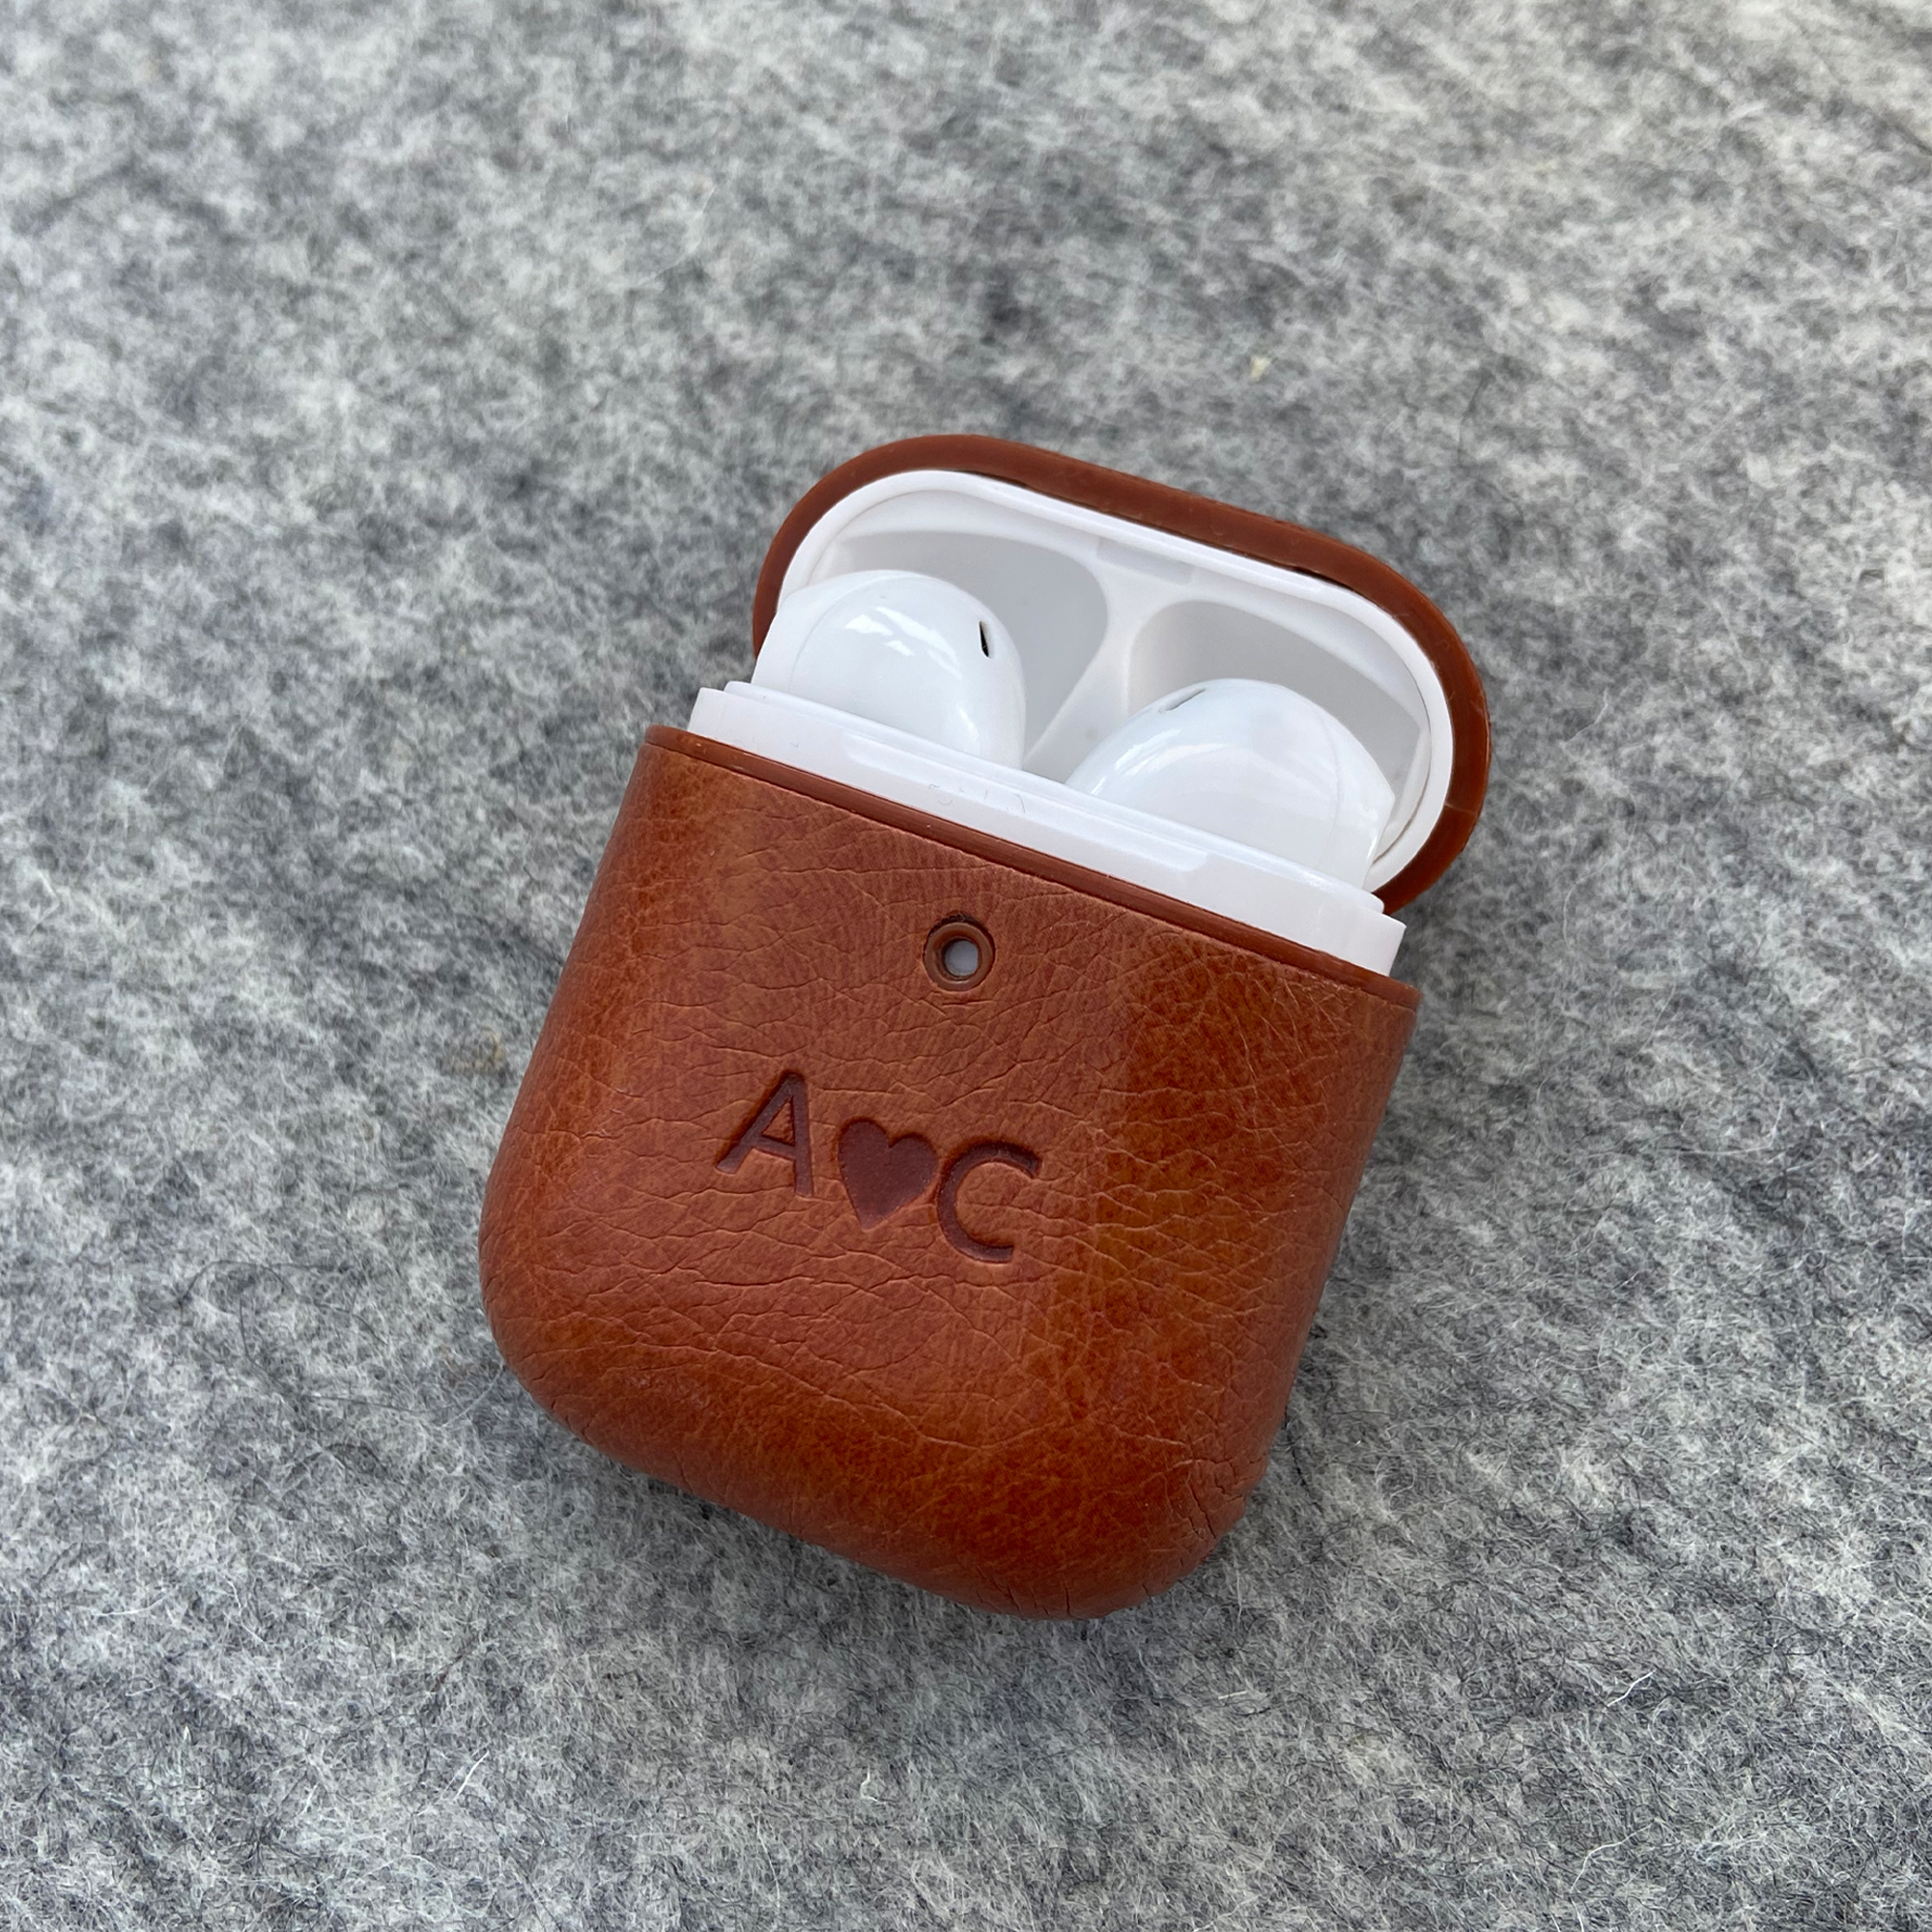 AirPods 2nd Generation Case